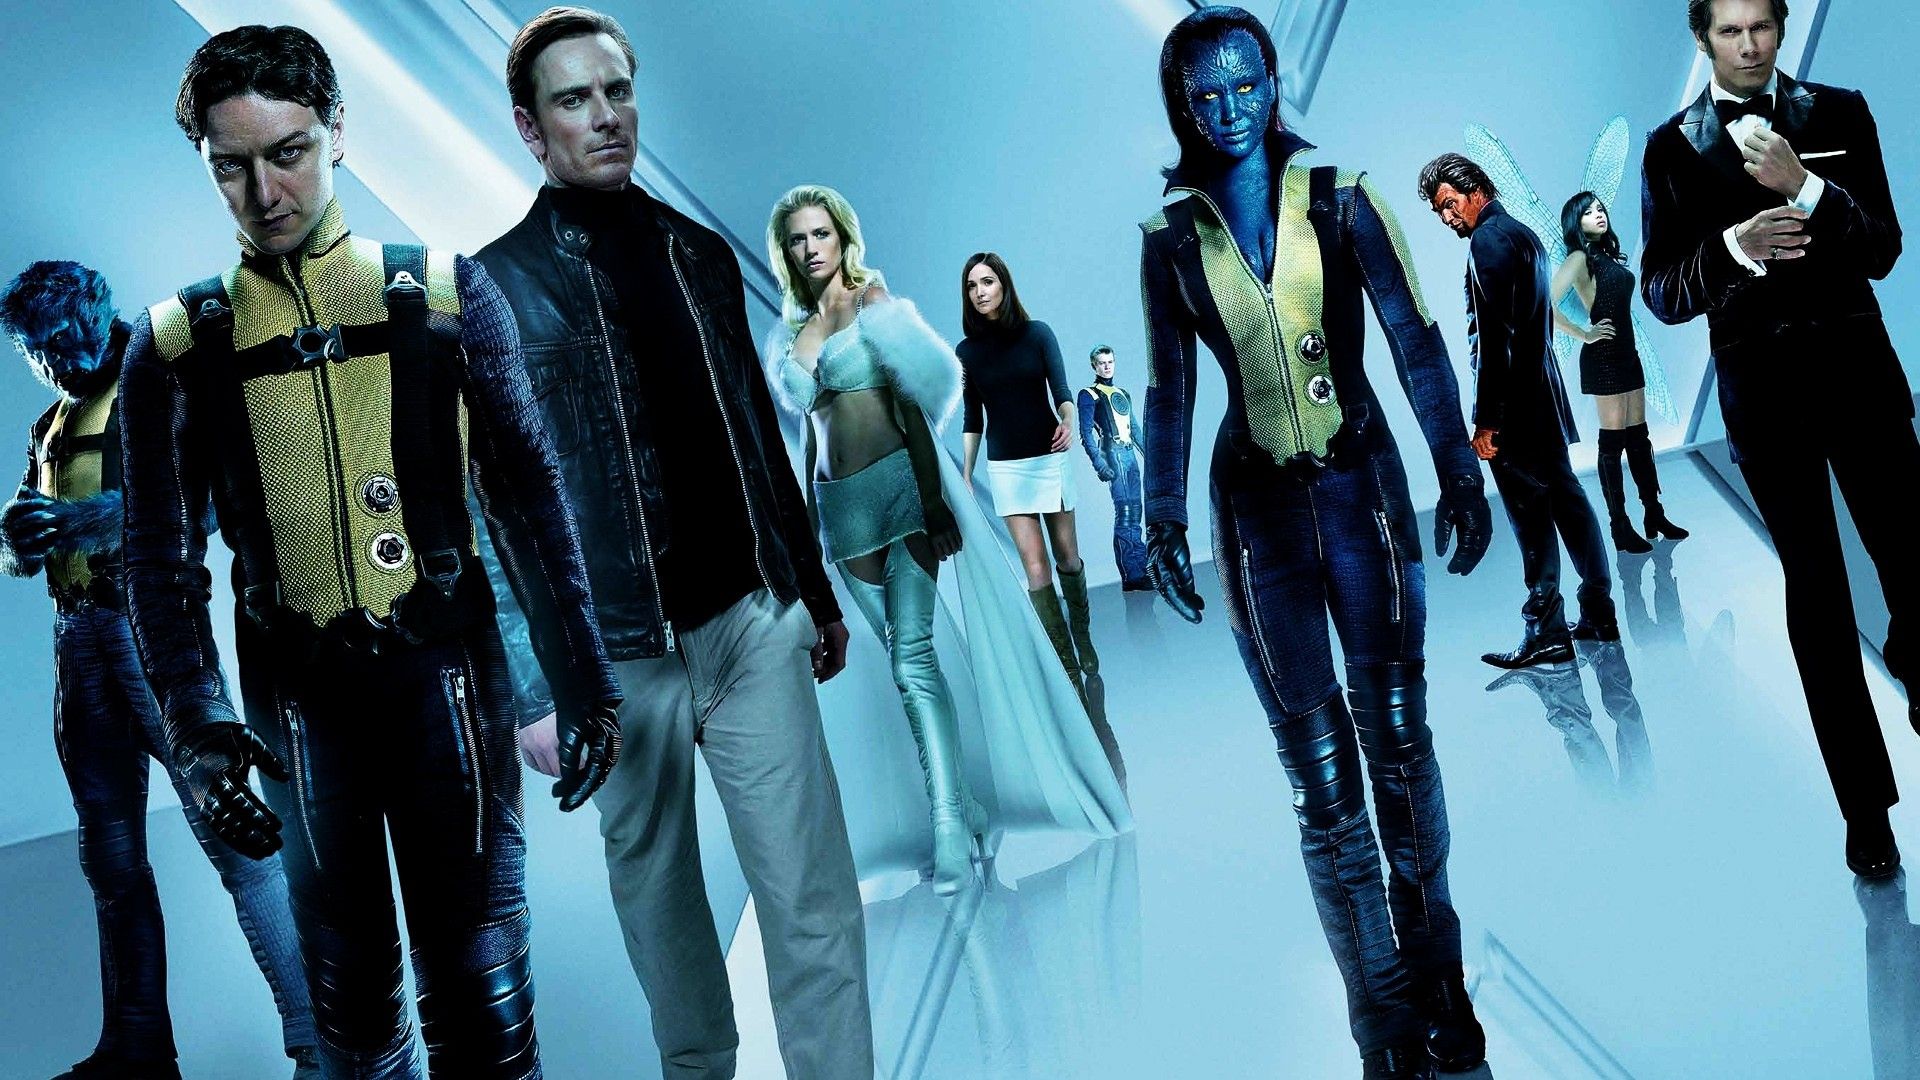 Wallpaper, Michael Fassbender, movies, fashion, X Men, Jennifer Lawrence, Charles Xavier, spring, Magneto, Mystique, James McAvoy, Emma Frost, Beast character, X Men First Class, musical theatre, social group 1920x1080